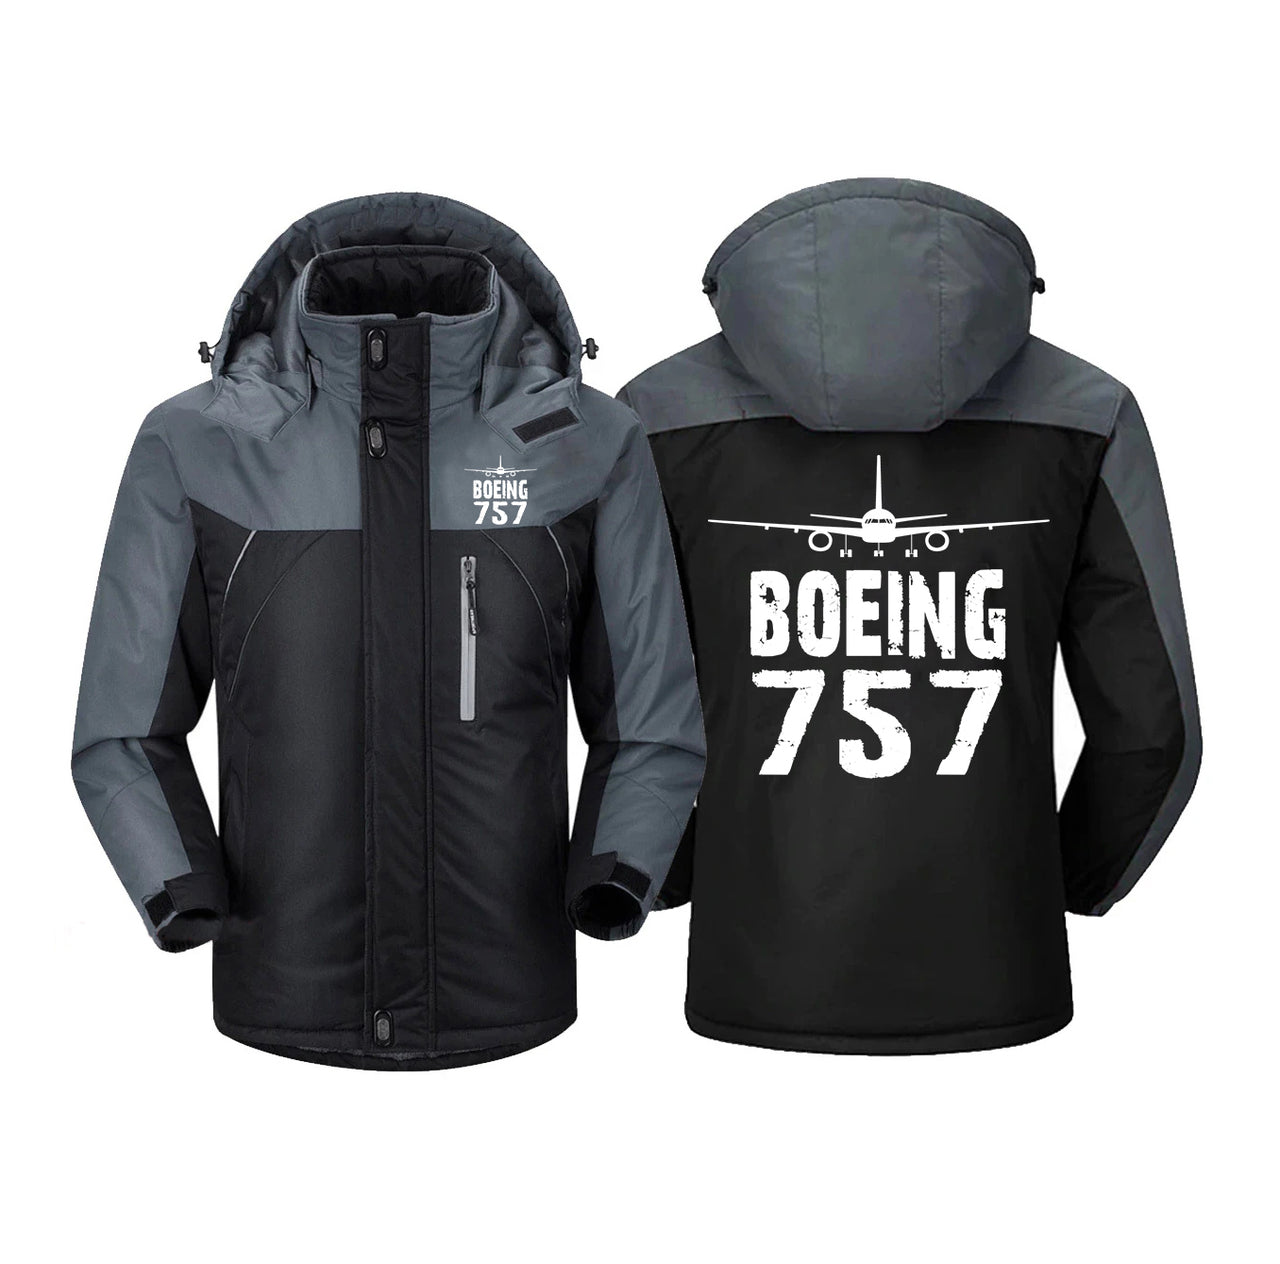 Boeing 757 & Plane Designed Thick Winter Jackets